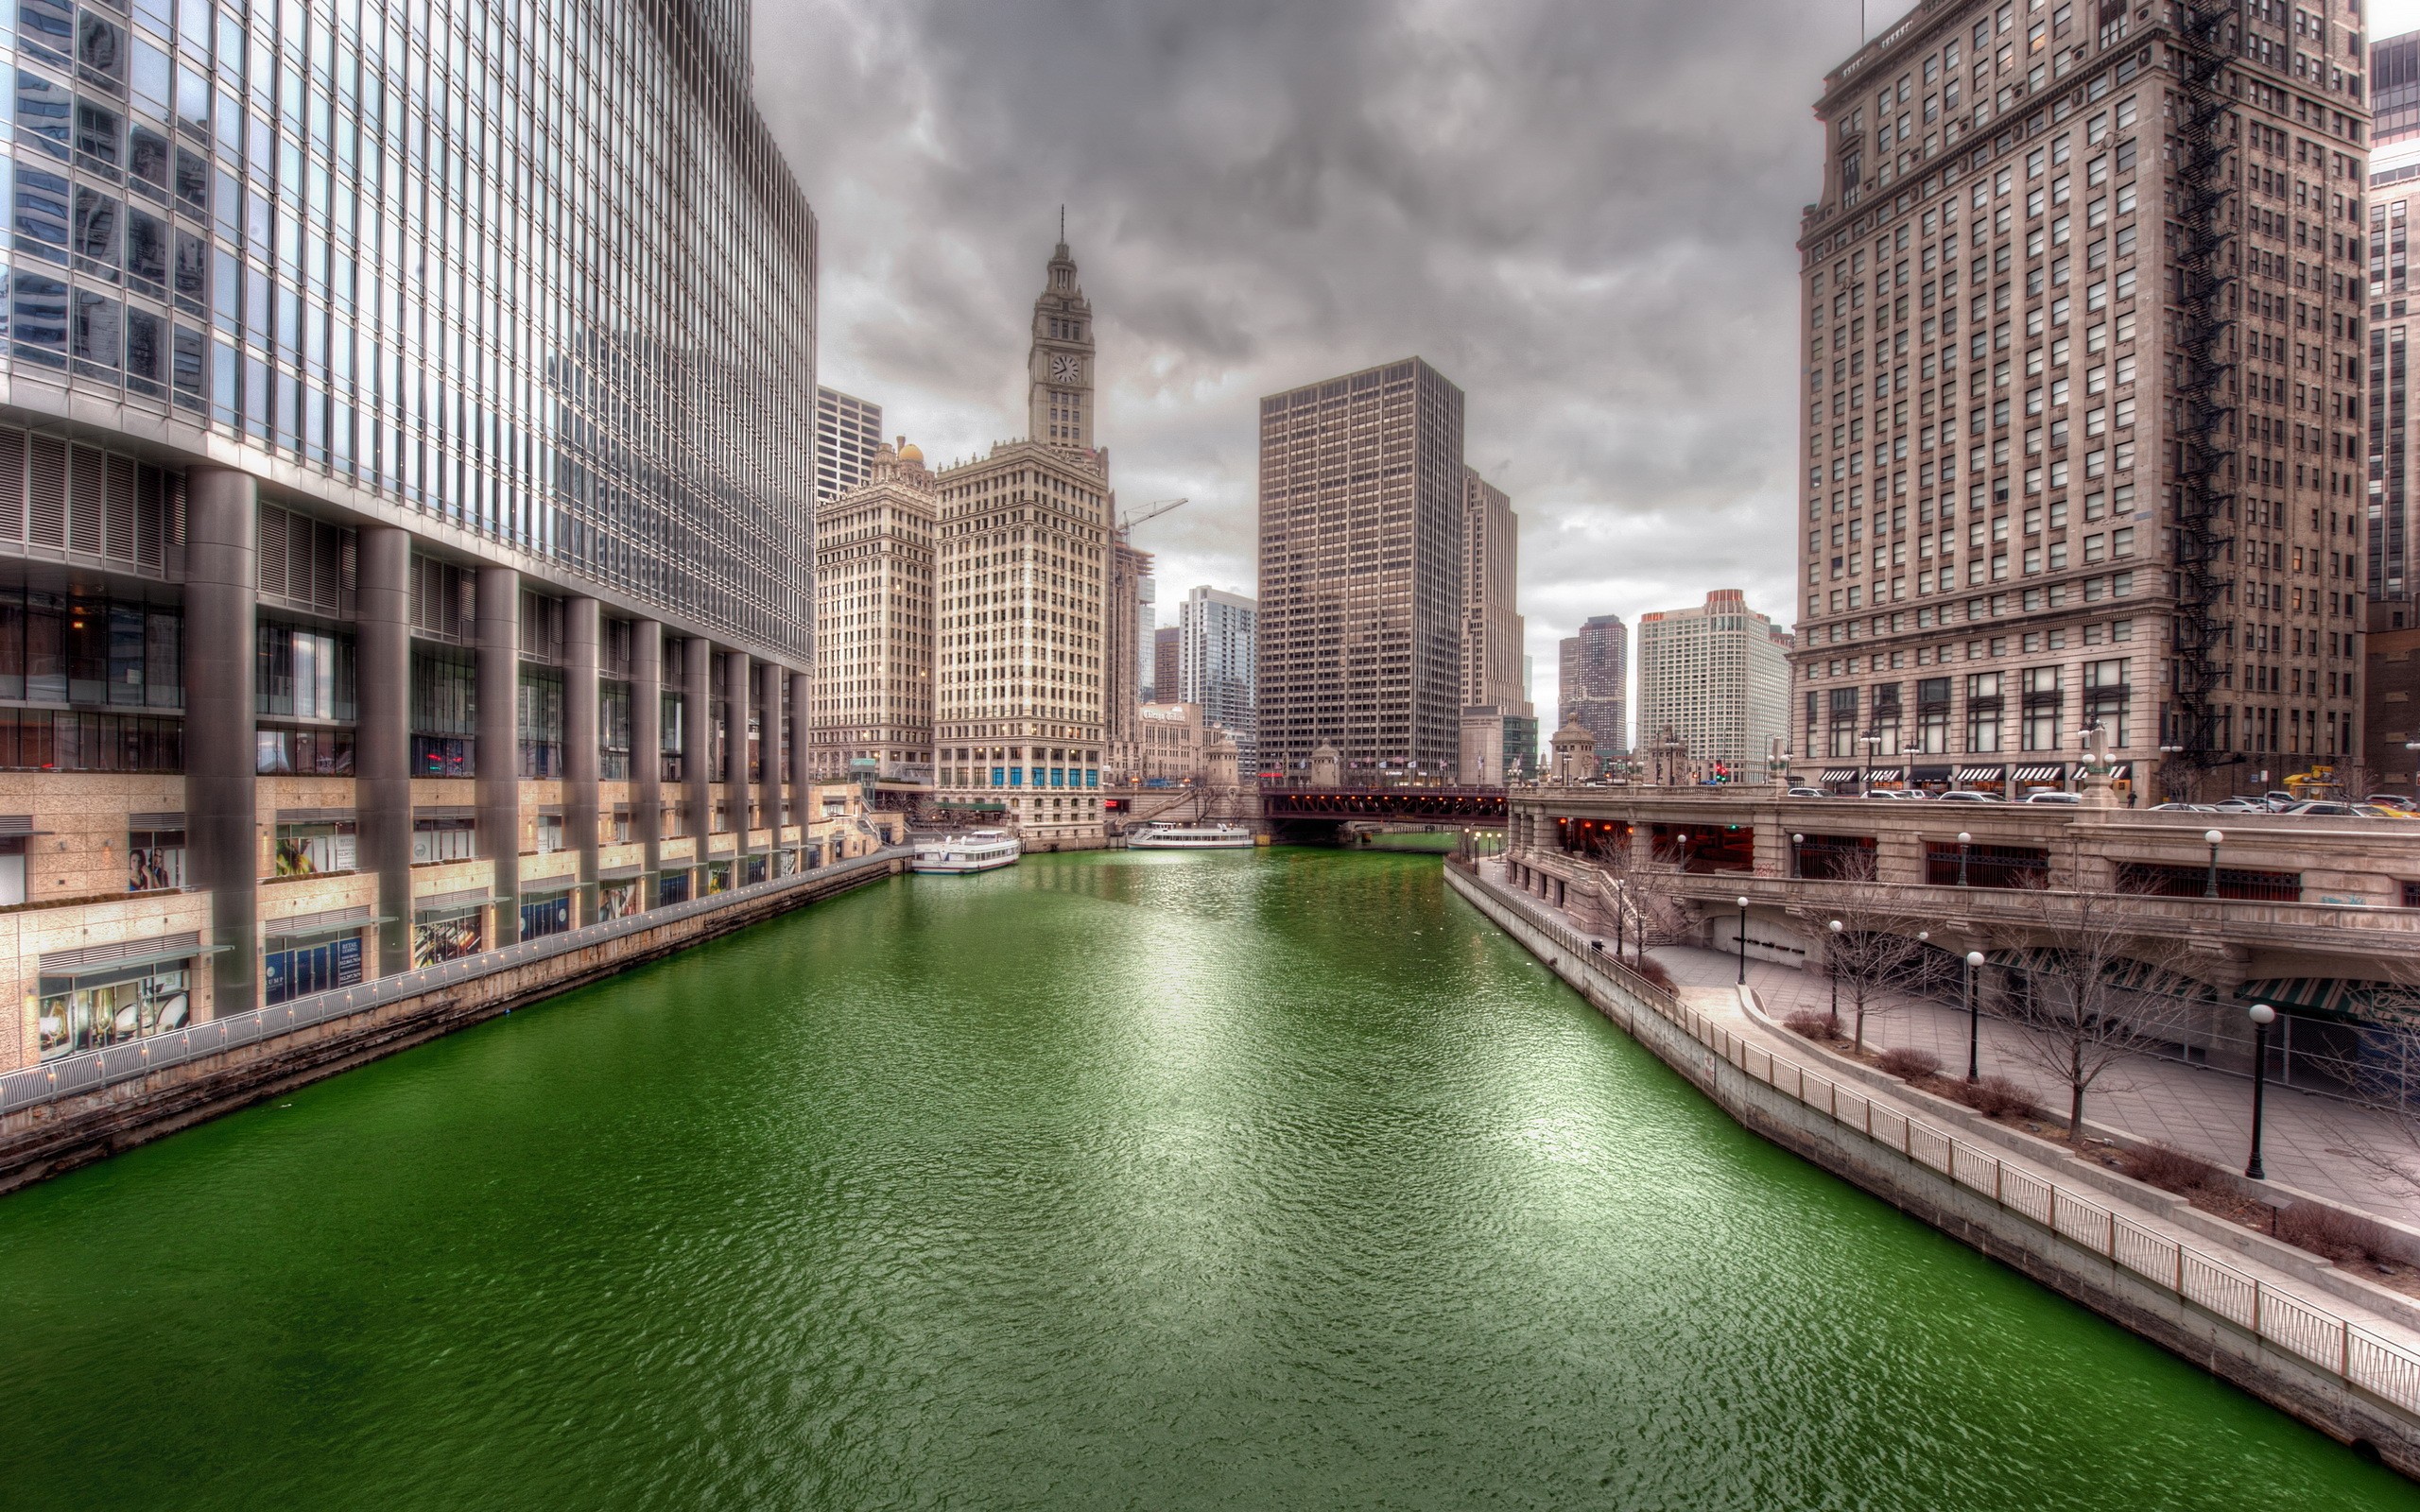 General 2560x1600 cityscape HDR building river Chicago clouds USA city